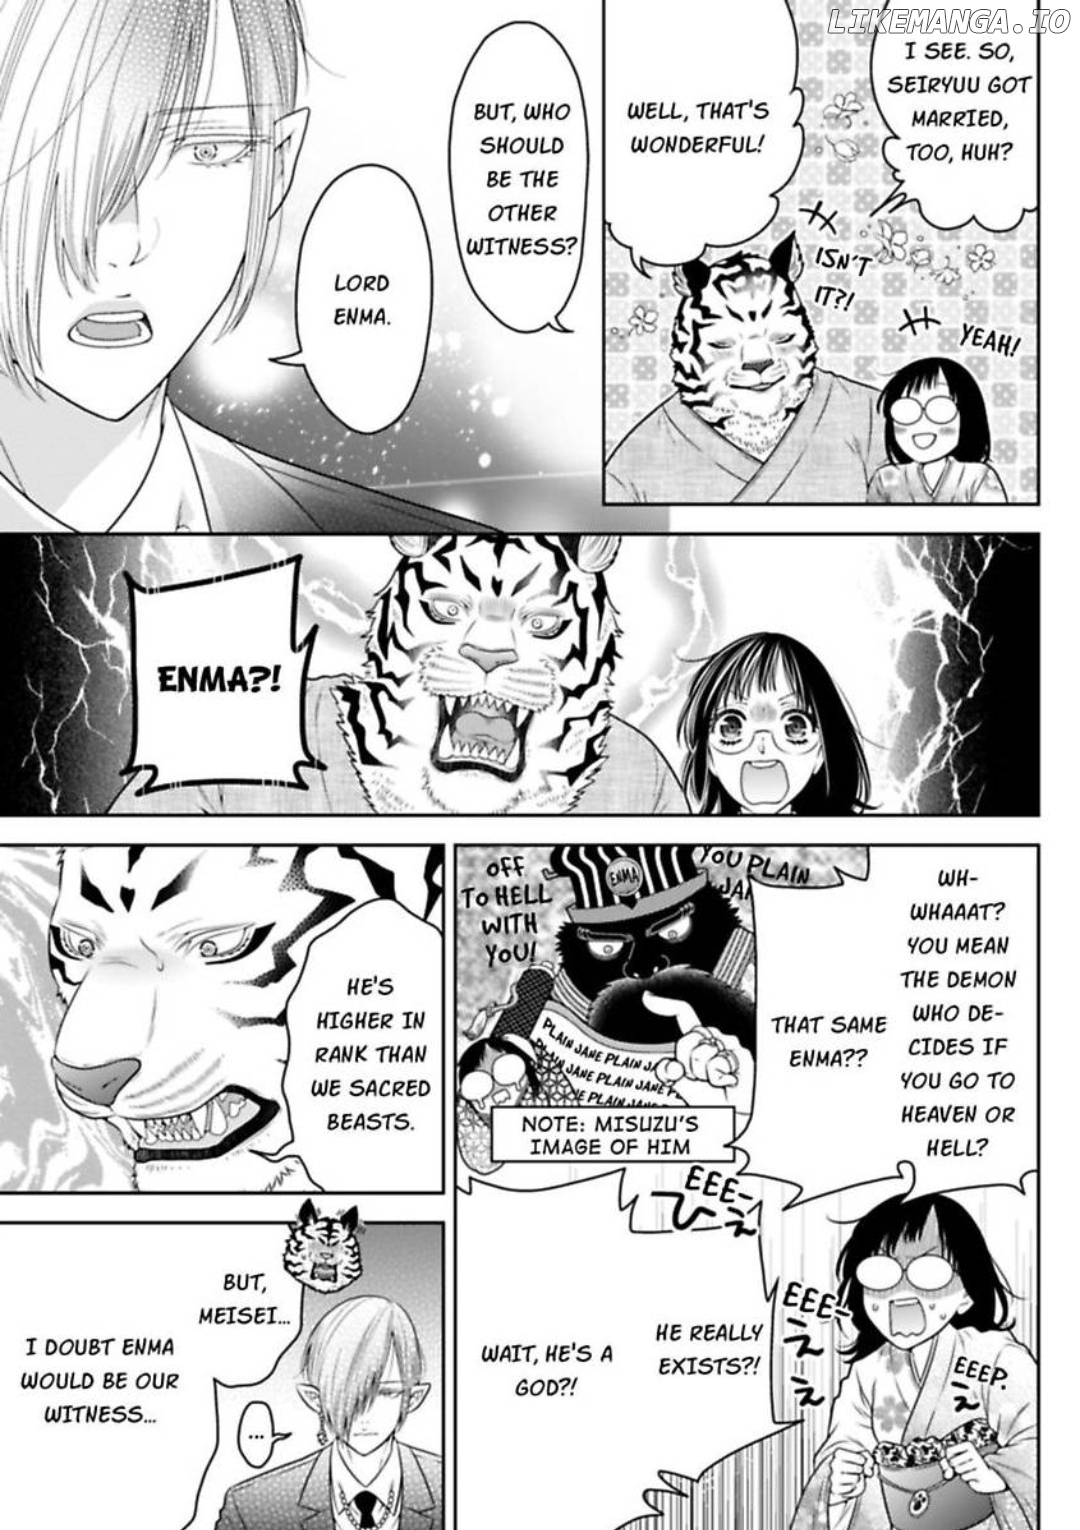 The White Tiger Loves Me to Death: A Fluffy Yet Passionate Love Story Chapter 6 - page 24